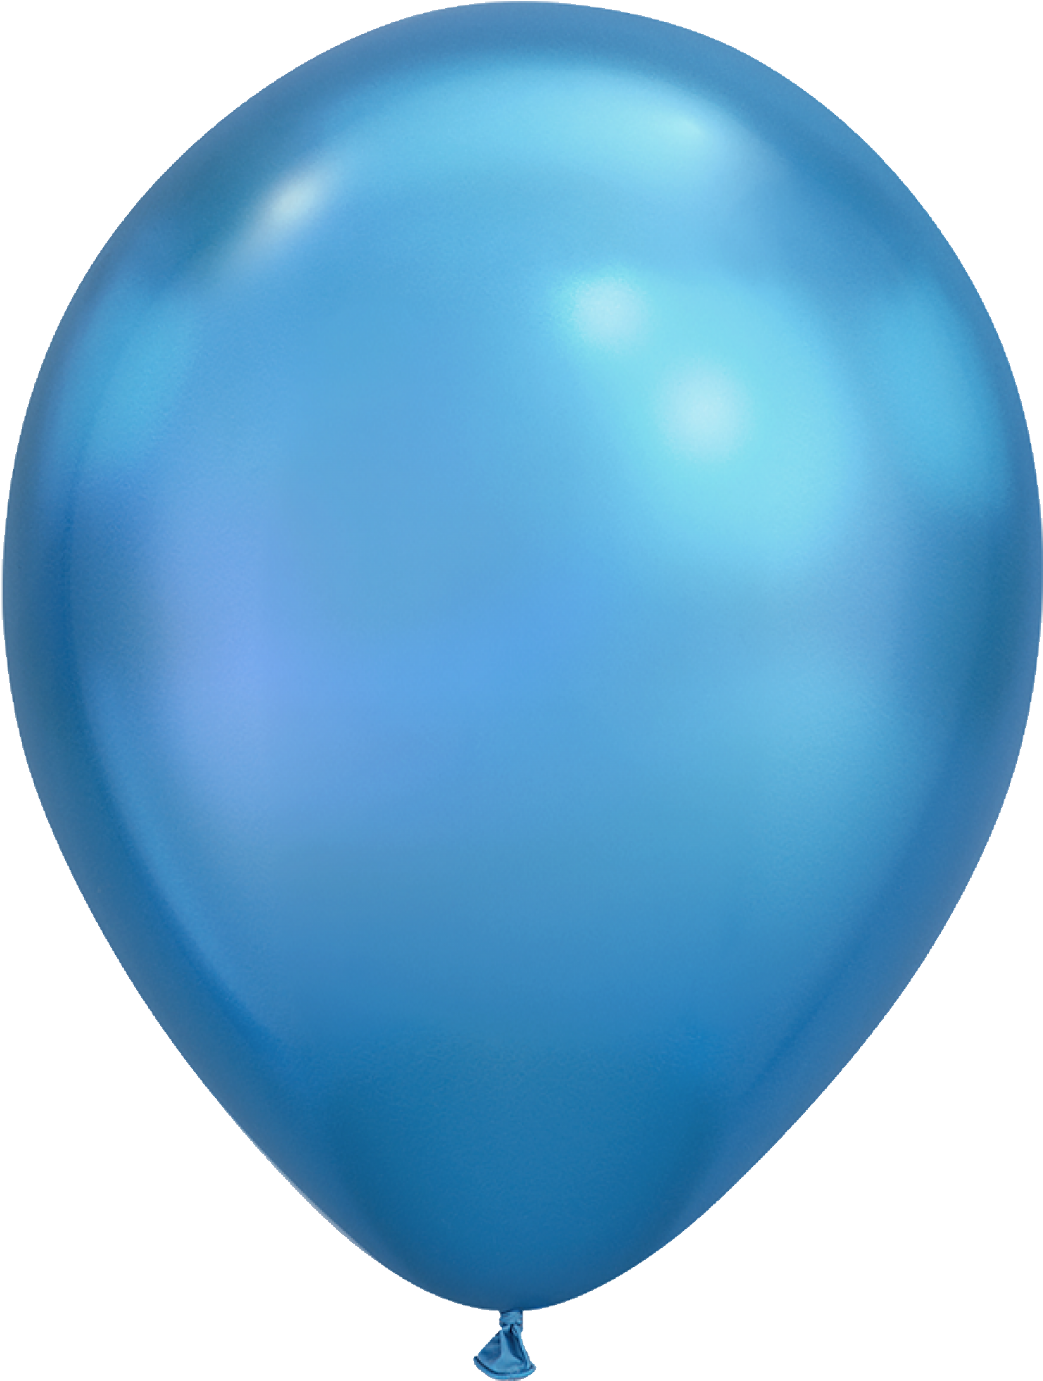 Real Blue Balloon Free Photo PNG Image